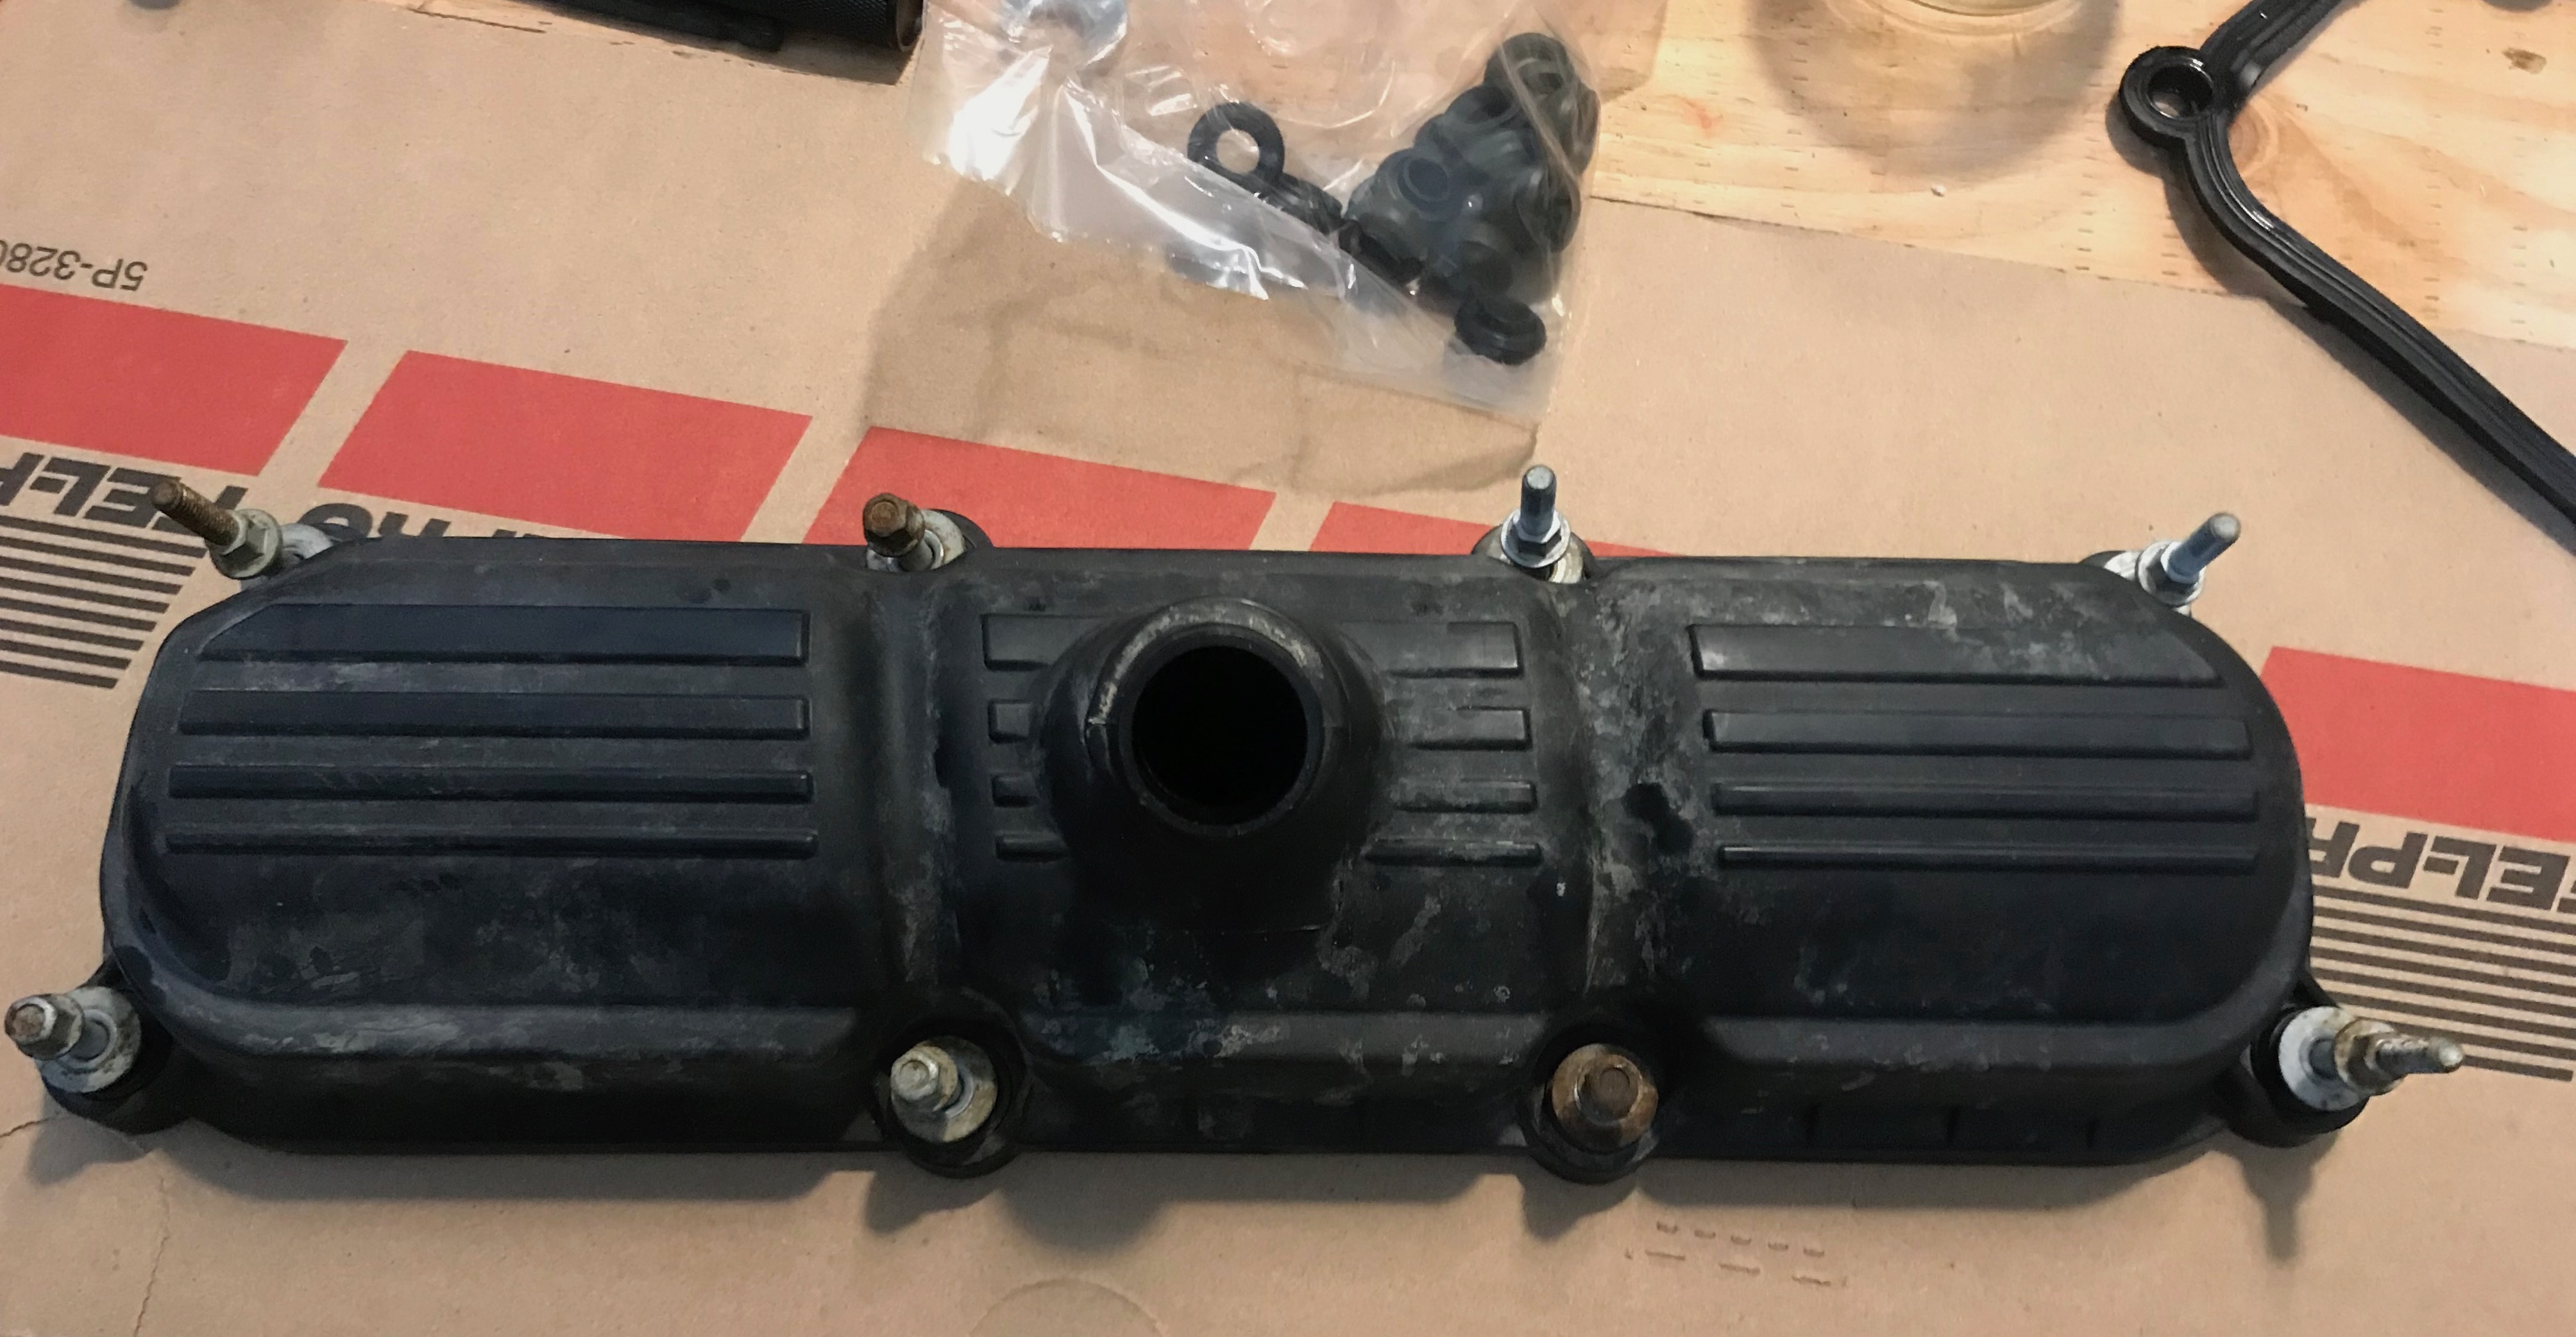 Valve Cover With PCV valve removed.  